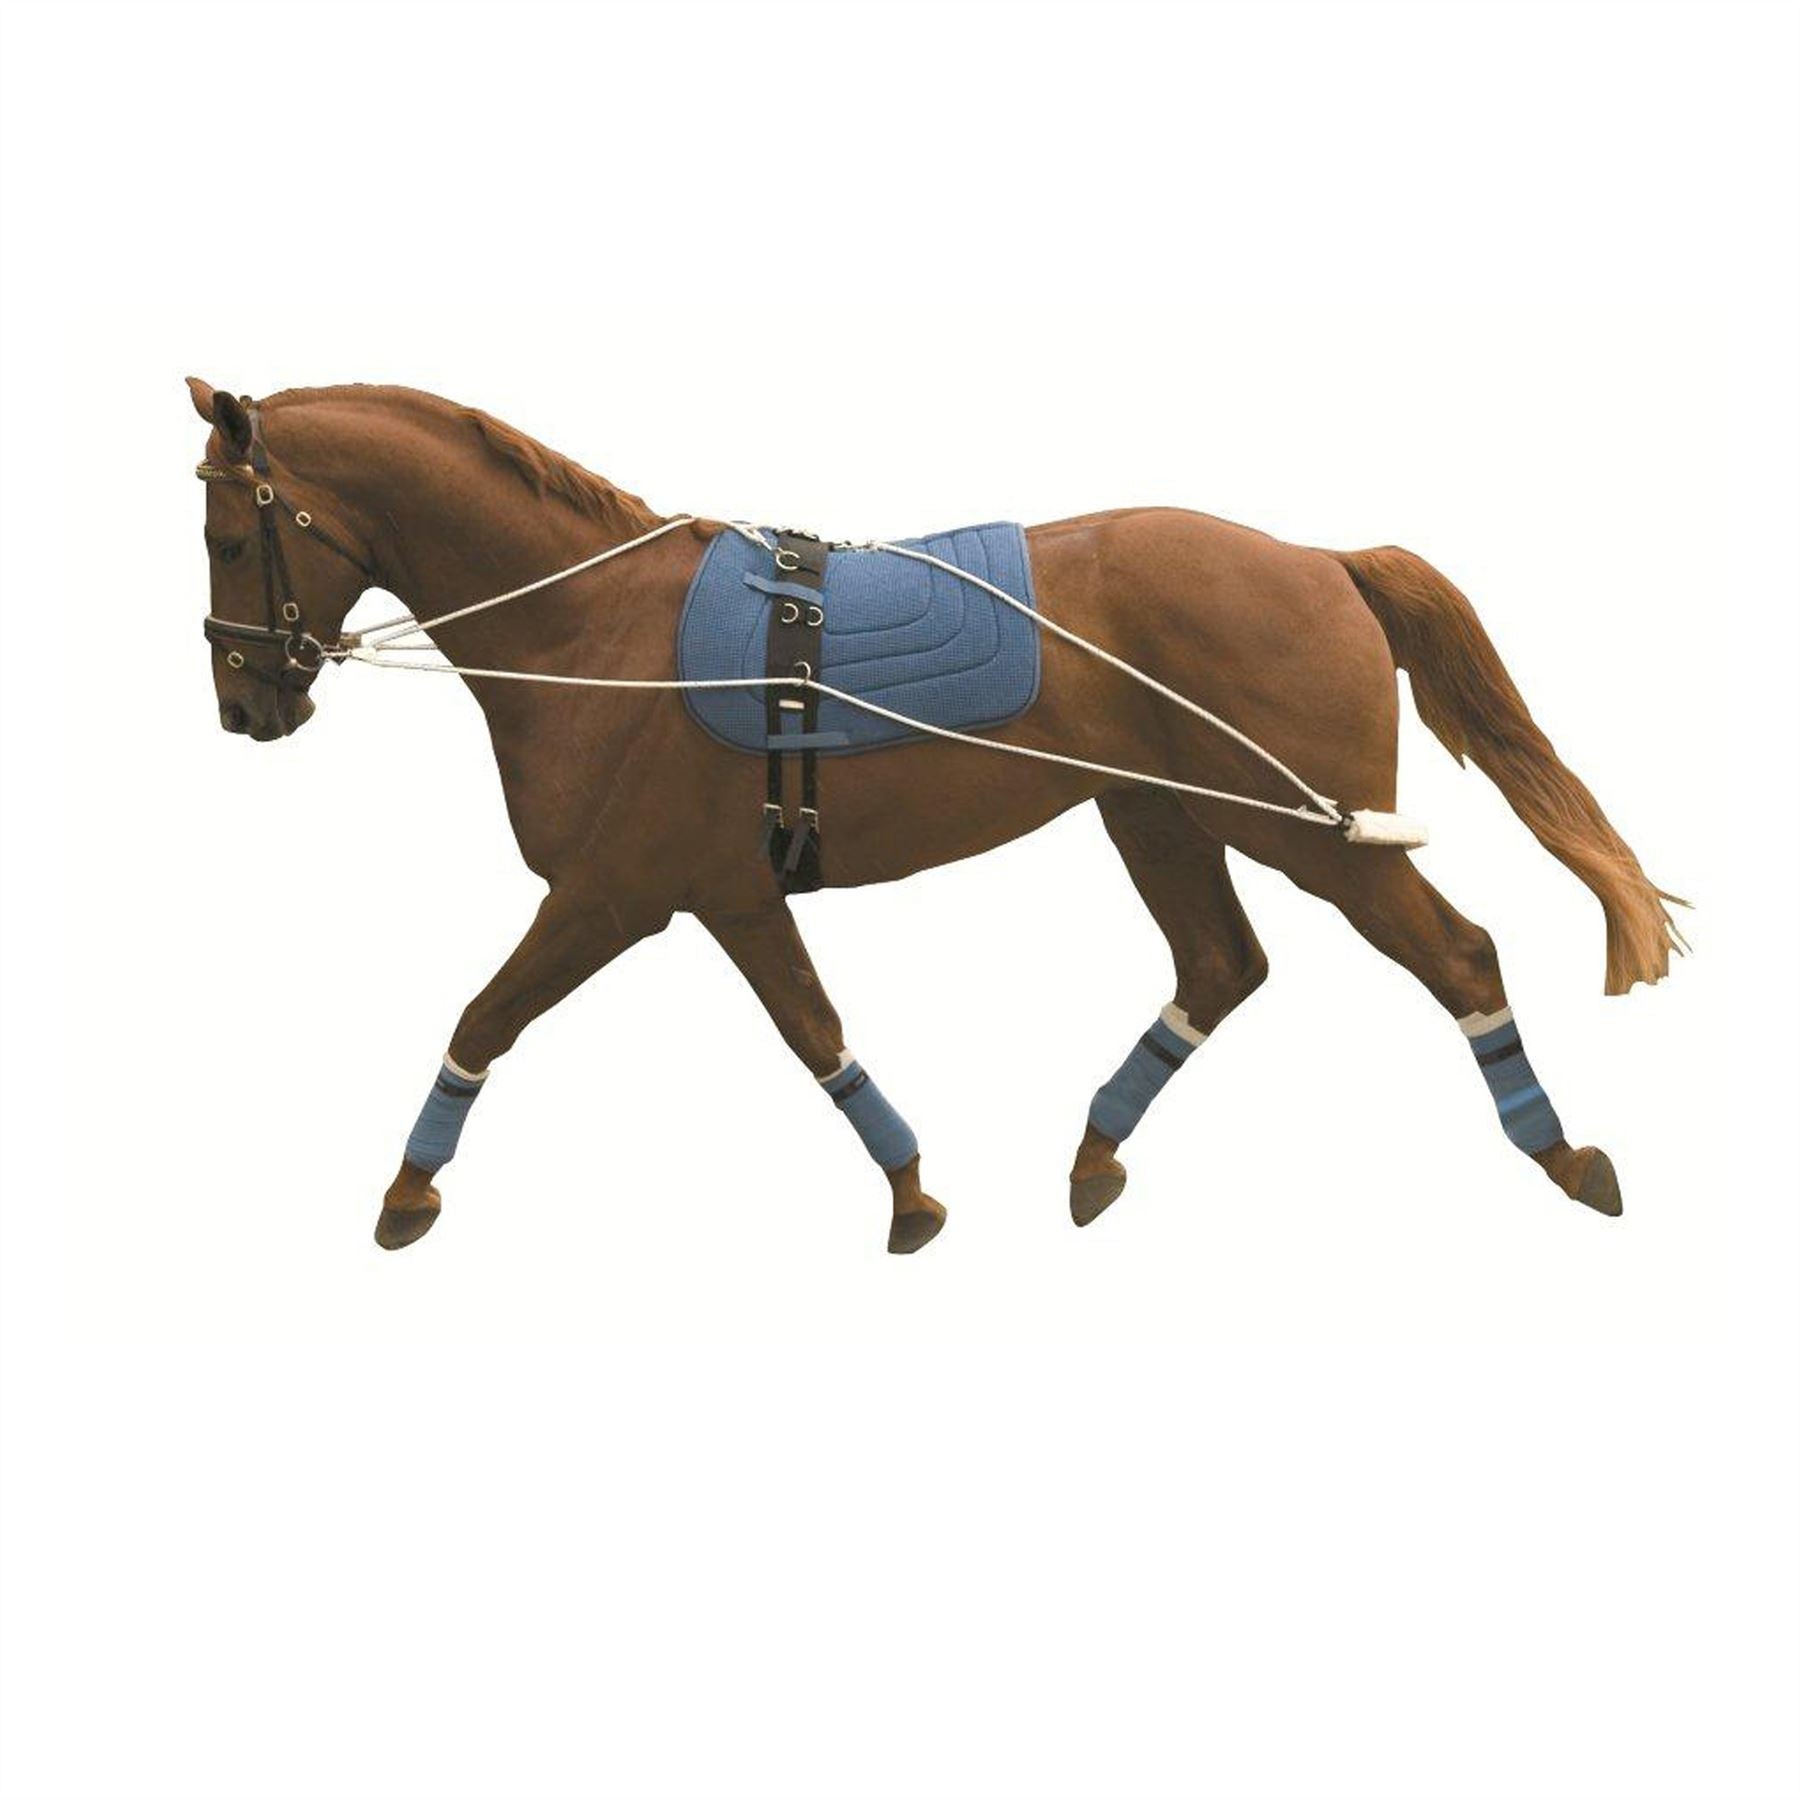 Kincade Lunging Training System - Just Horse Riders